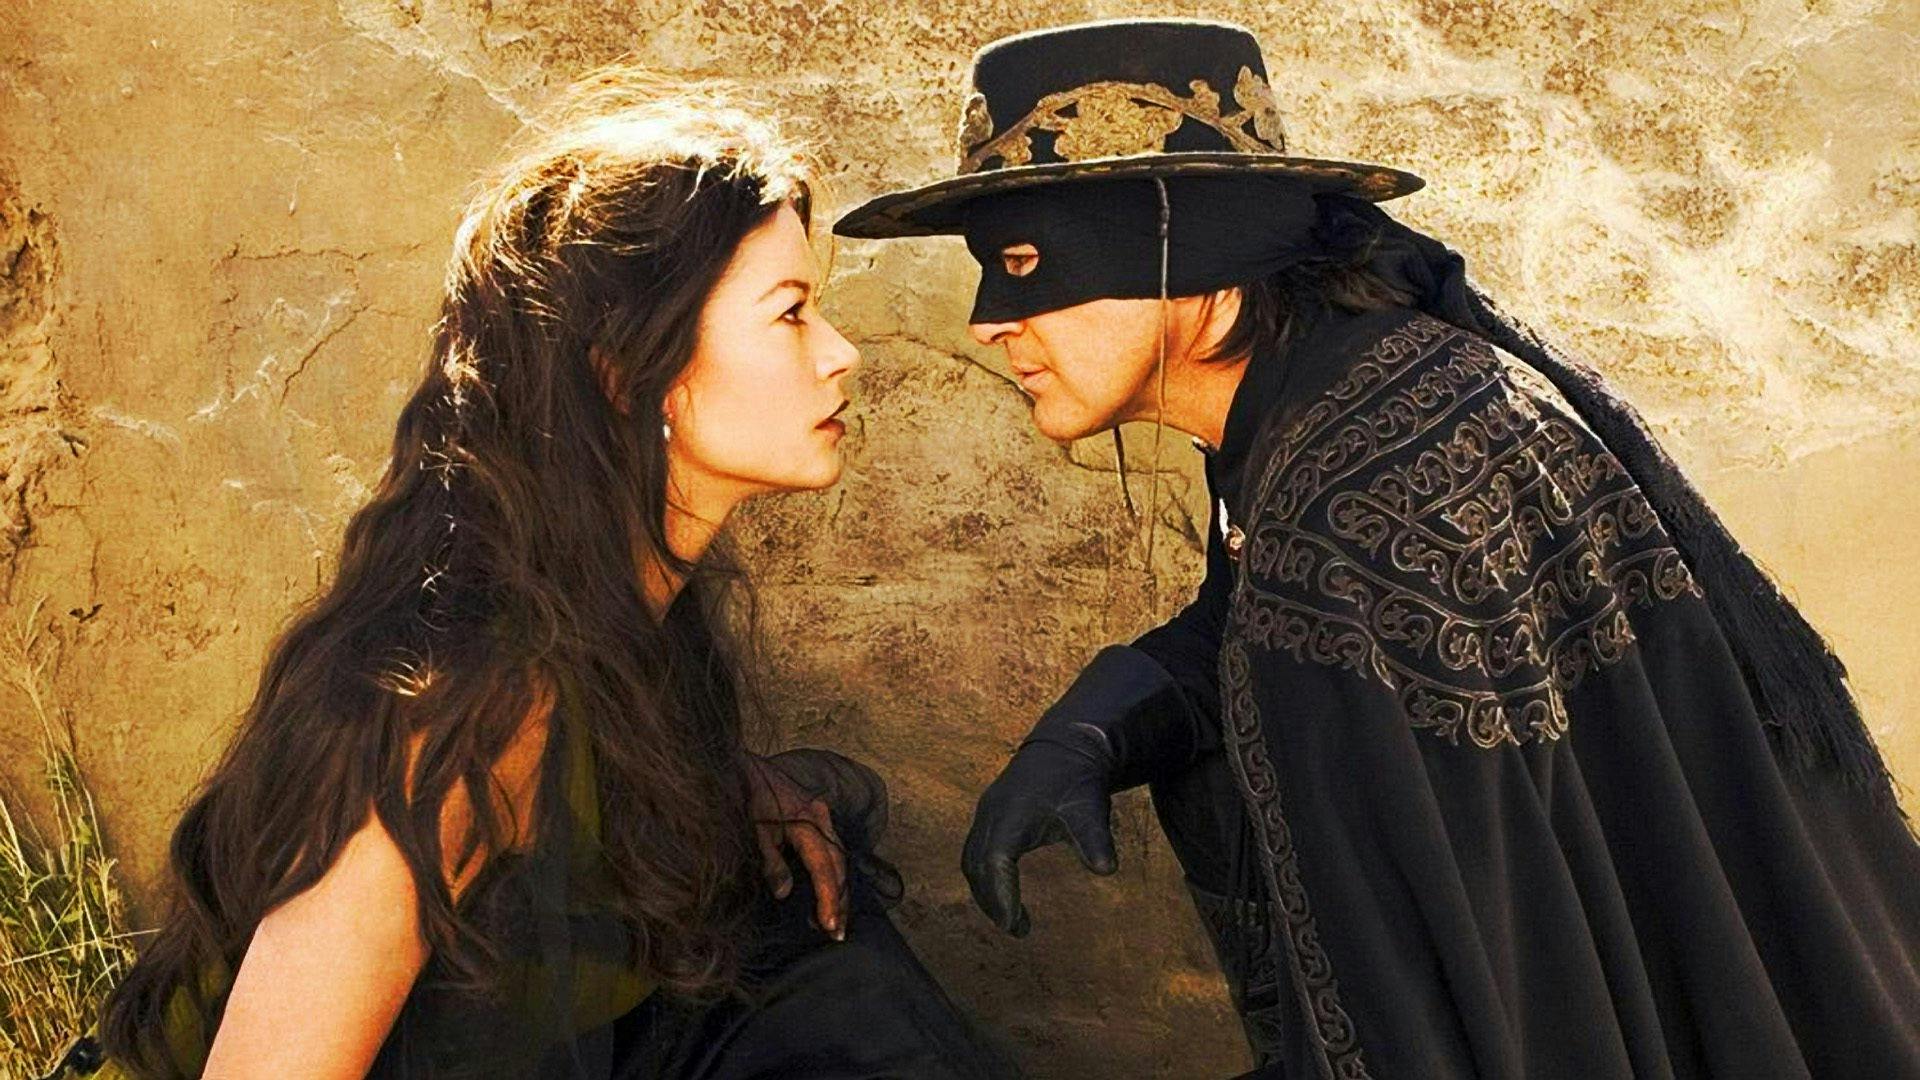 The Mask of Zorro (1998) - About the Movie